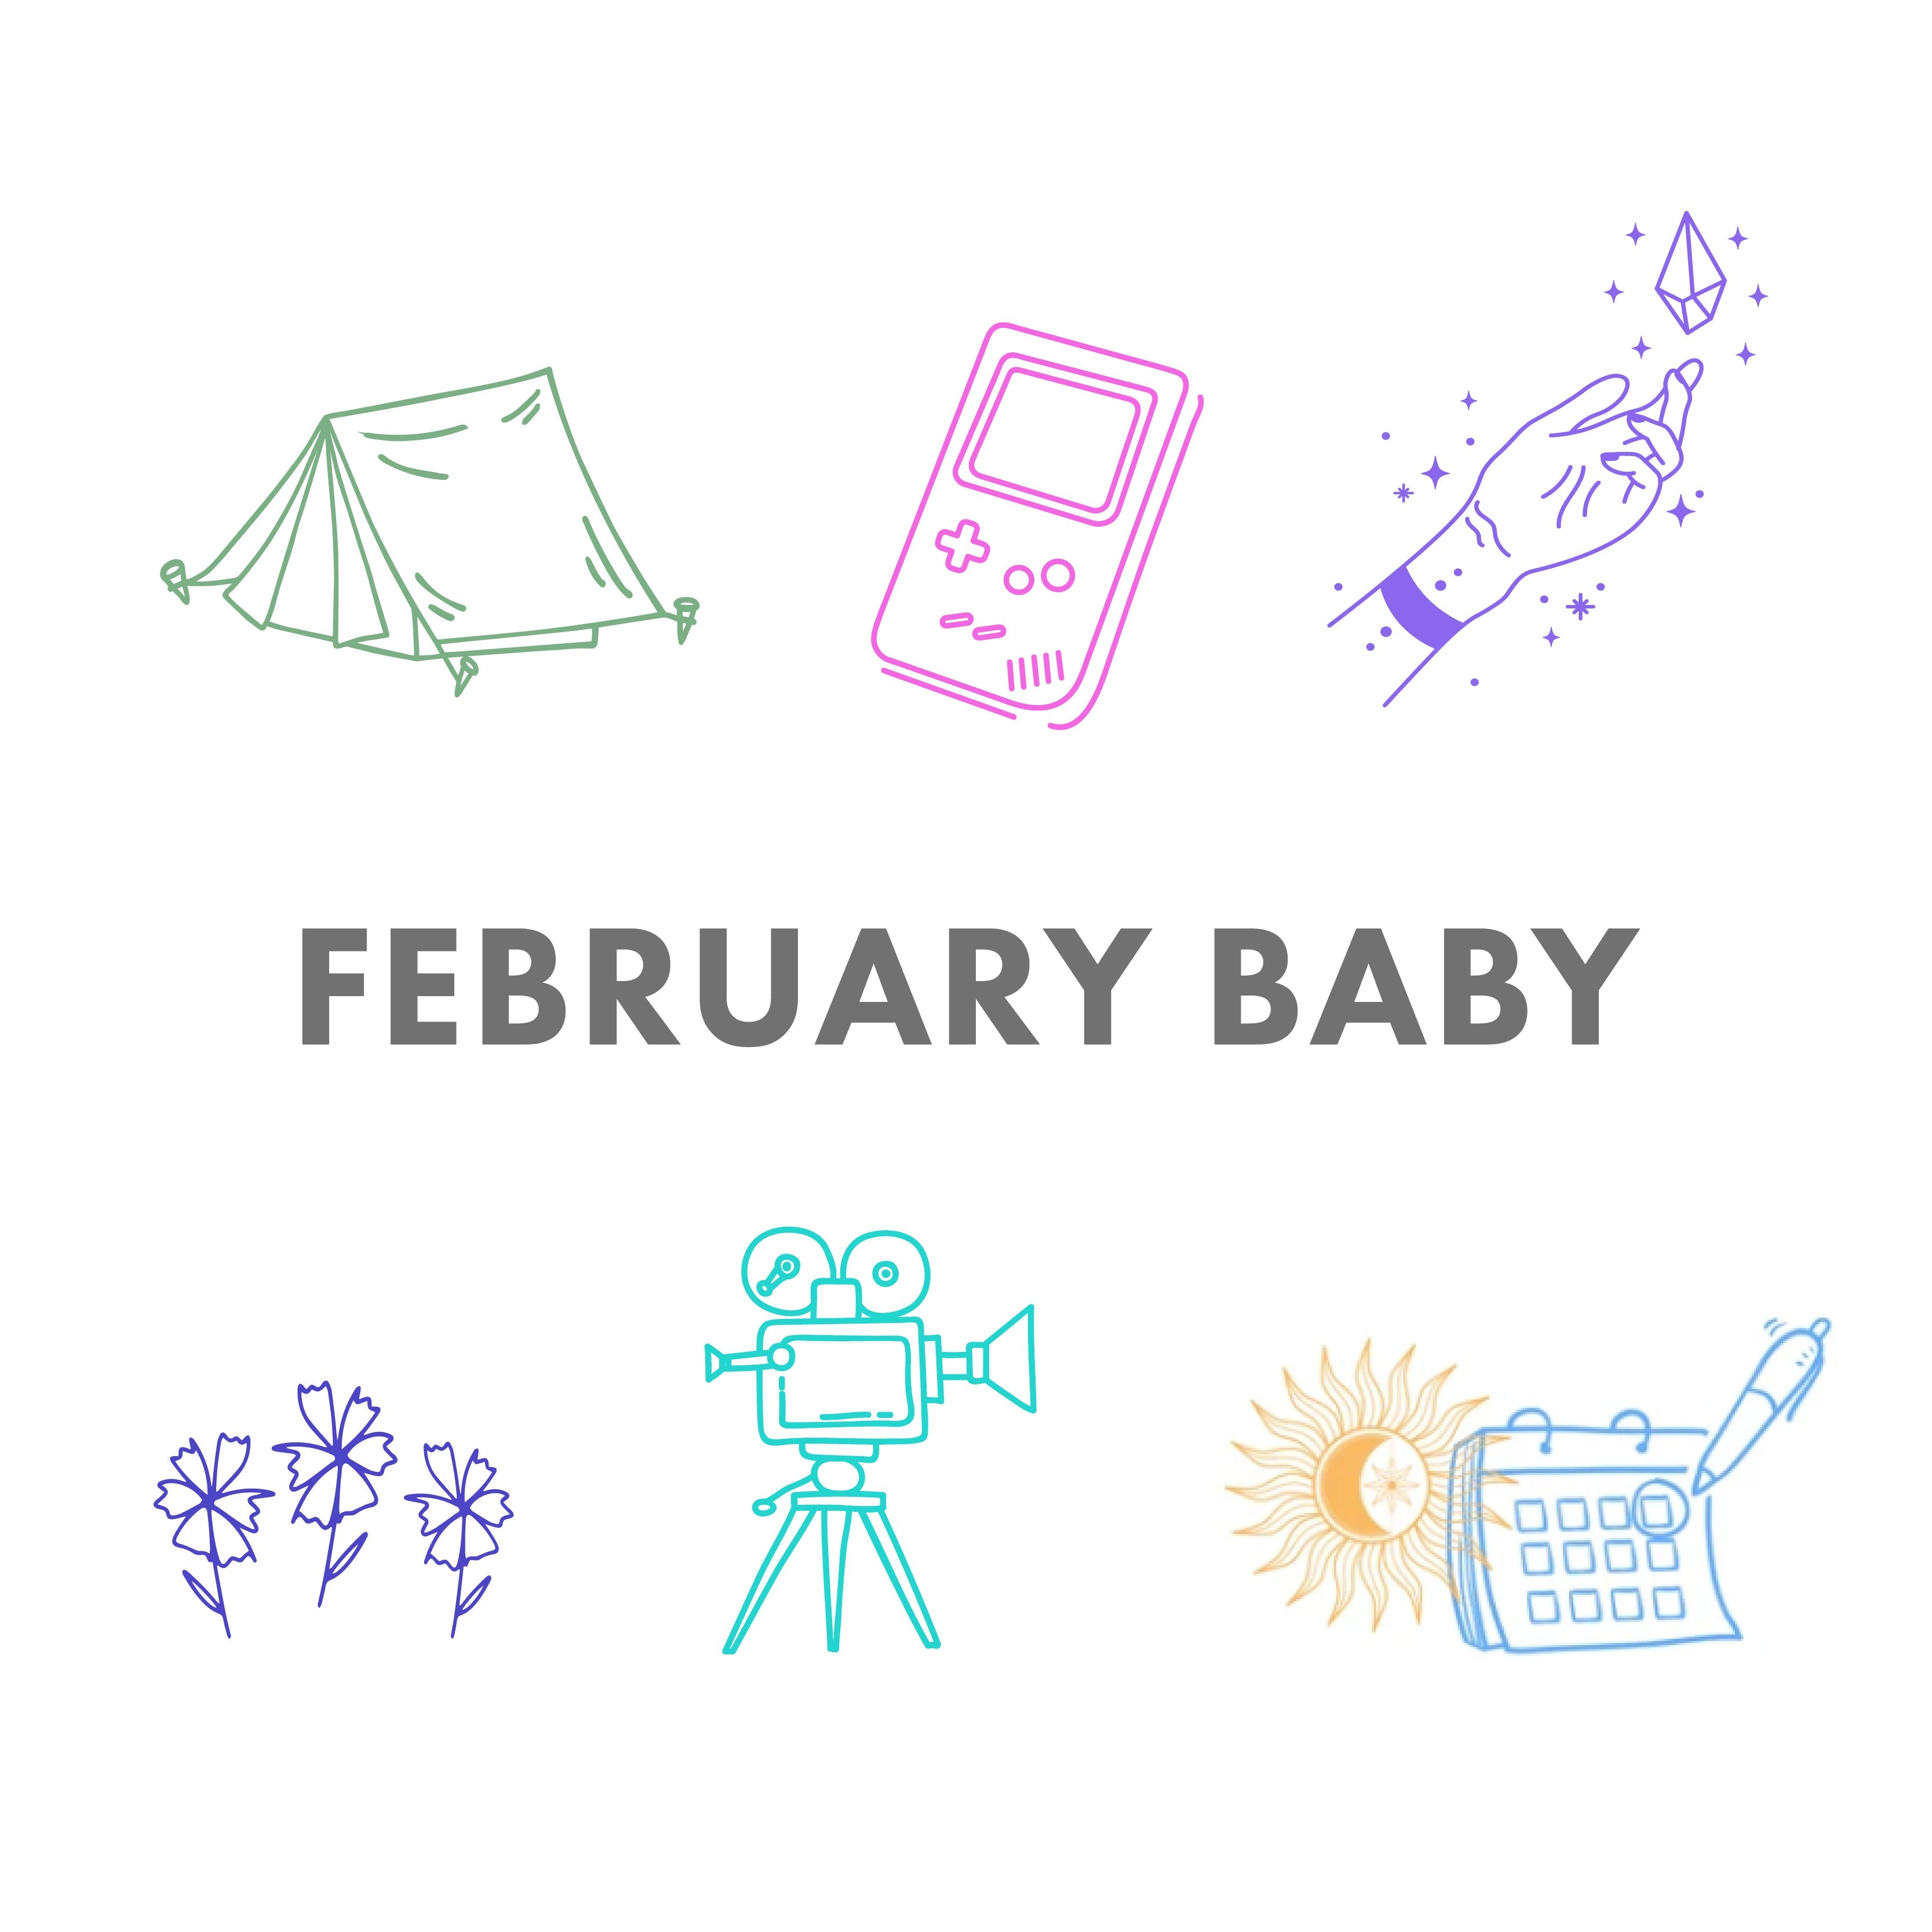 YOUR FEBRUARY BABY